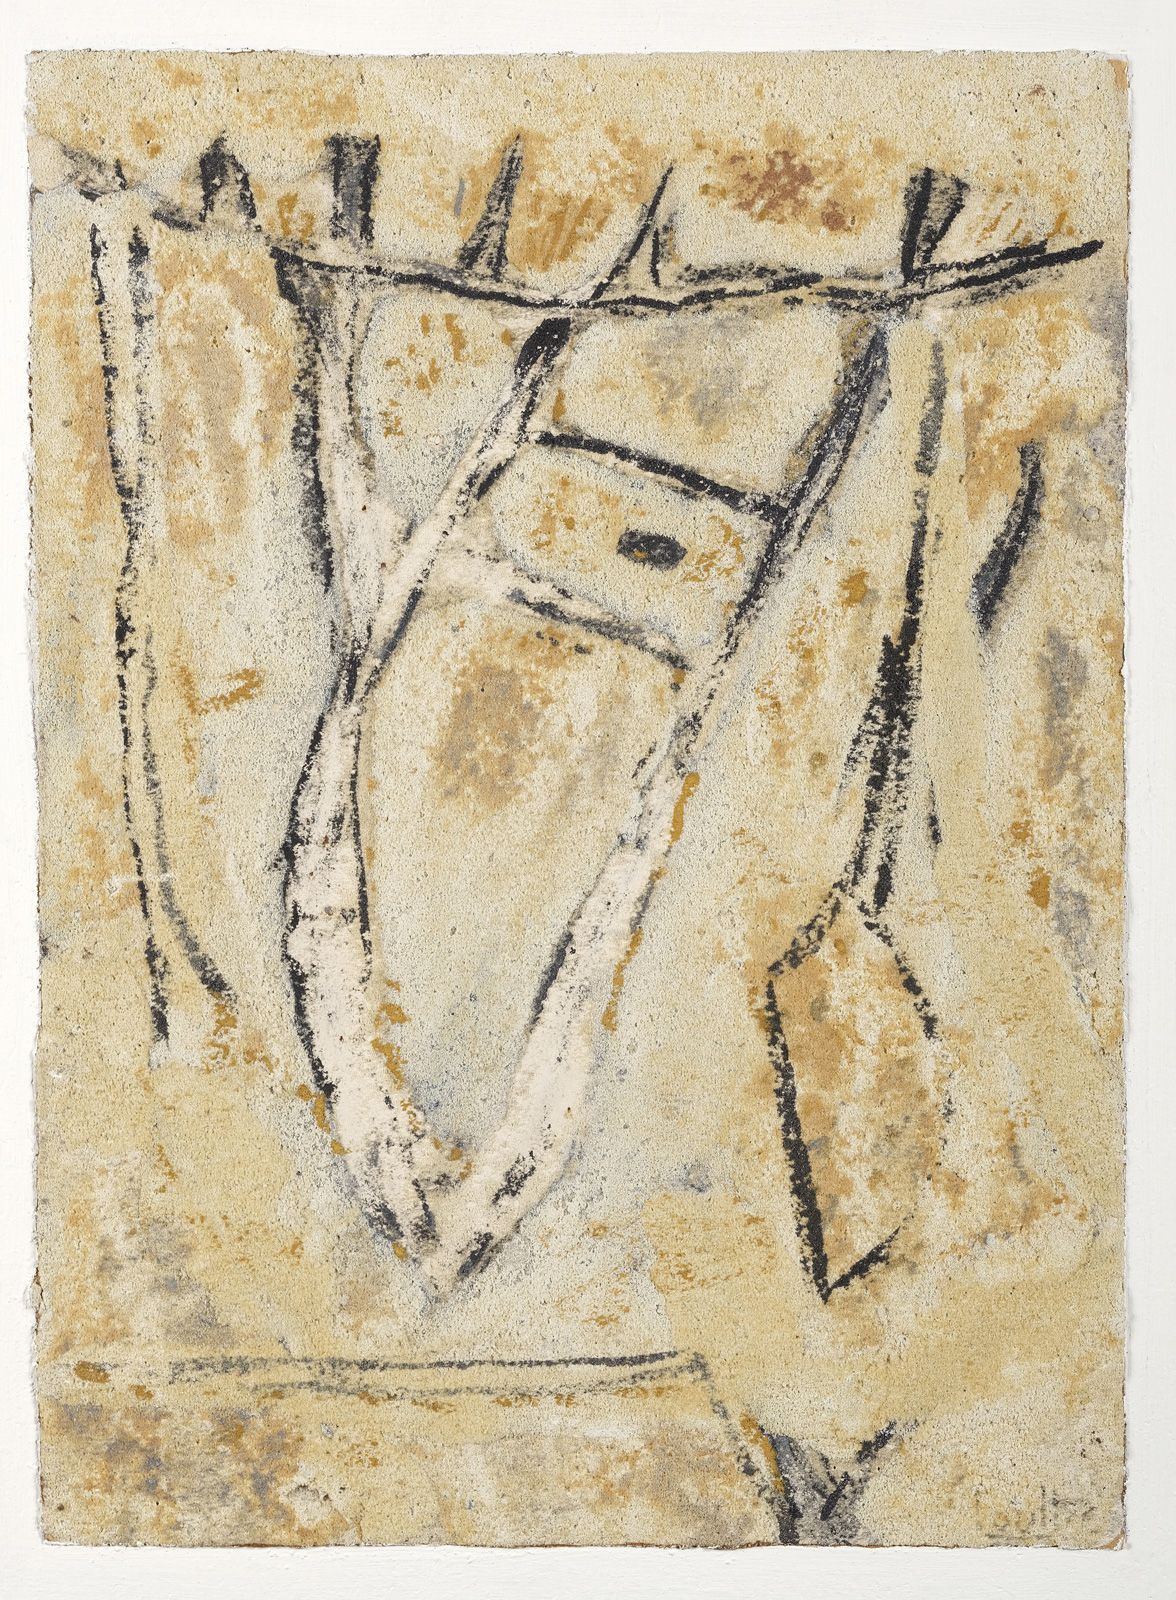 Null WOLFRAM (1926-2012)

A lack of air

Mixed media and sand on paper pasted on&hellip;